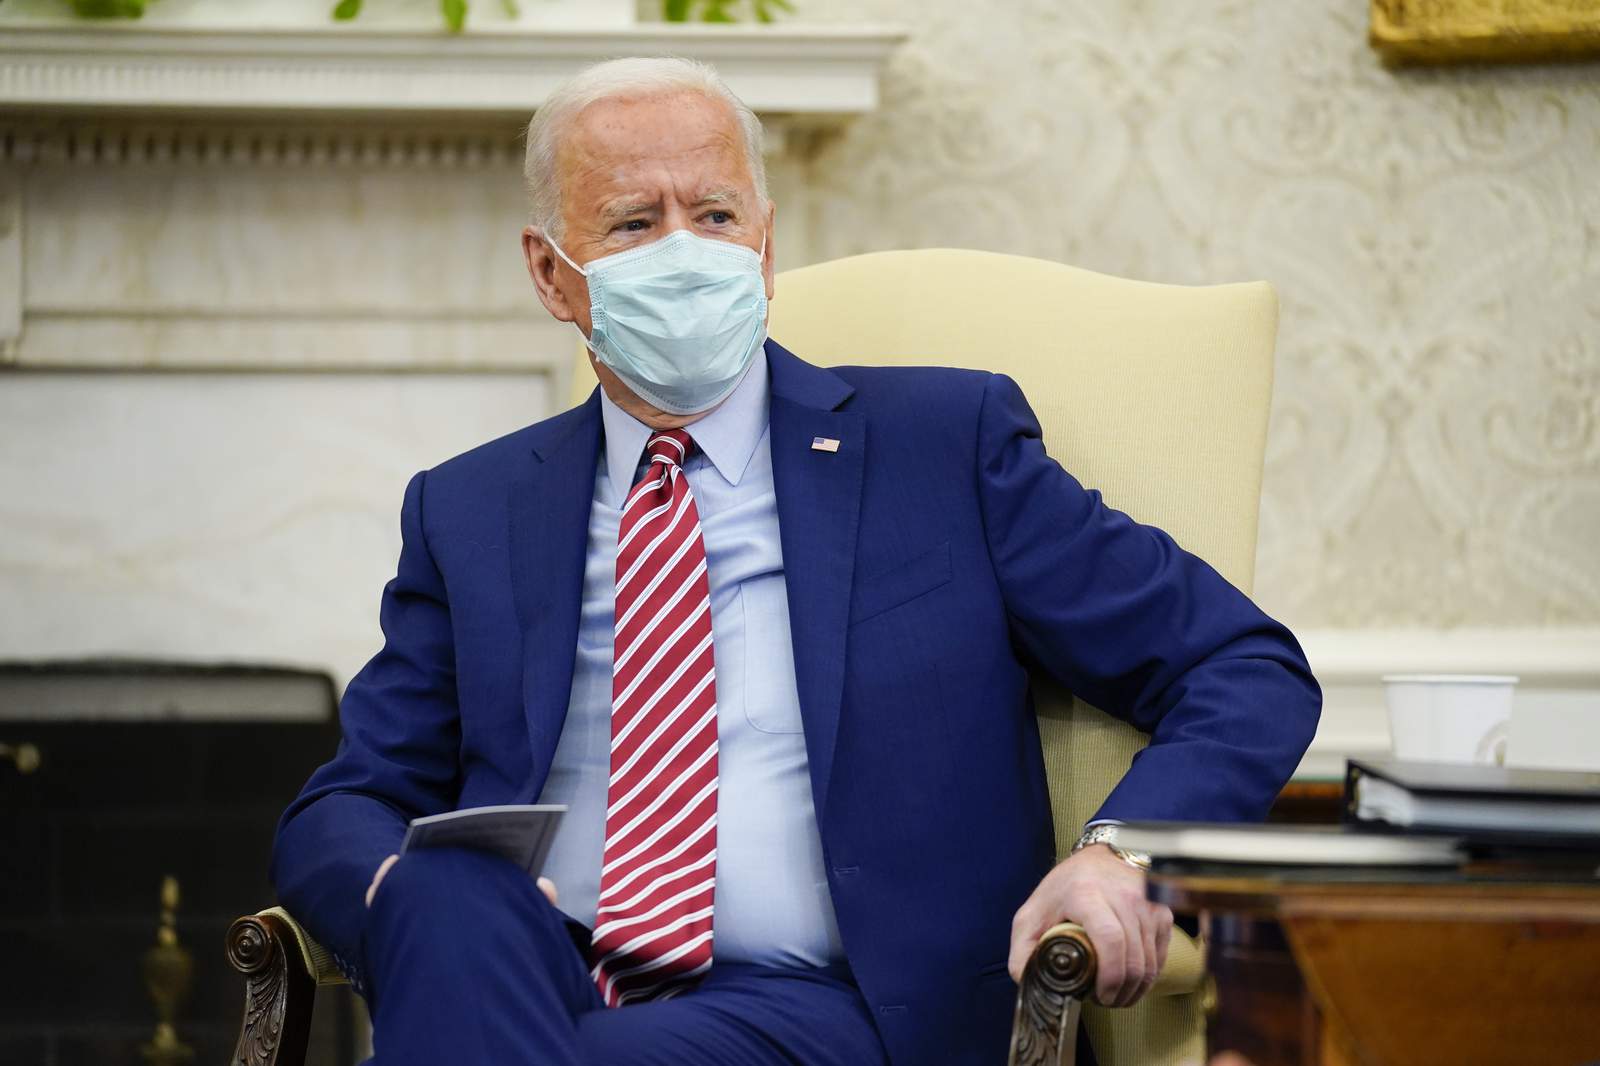 Biden thinks impeachment video may have swayed `some minds'